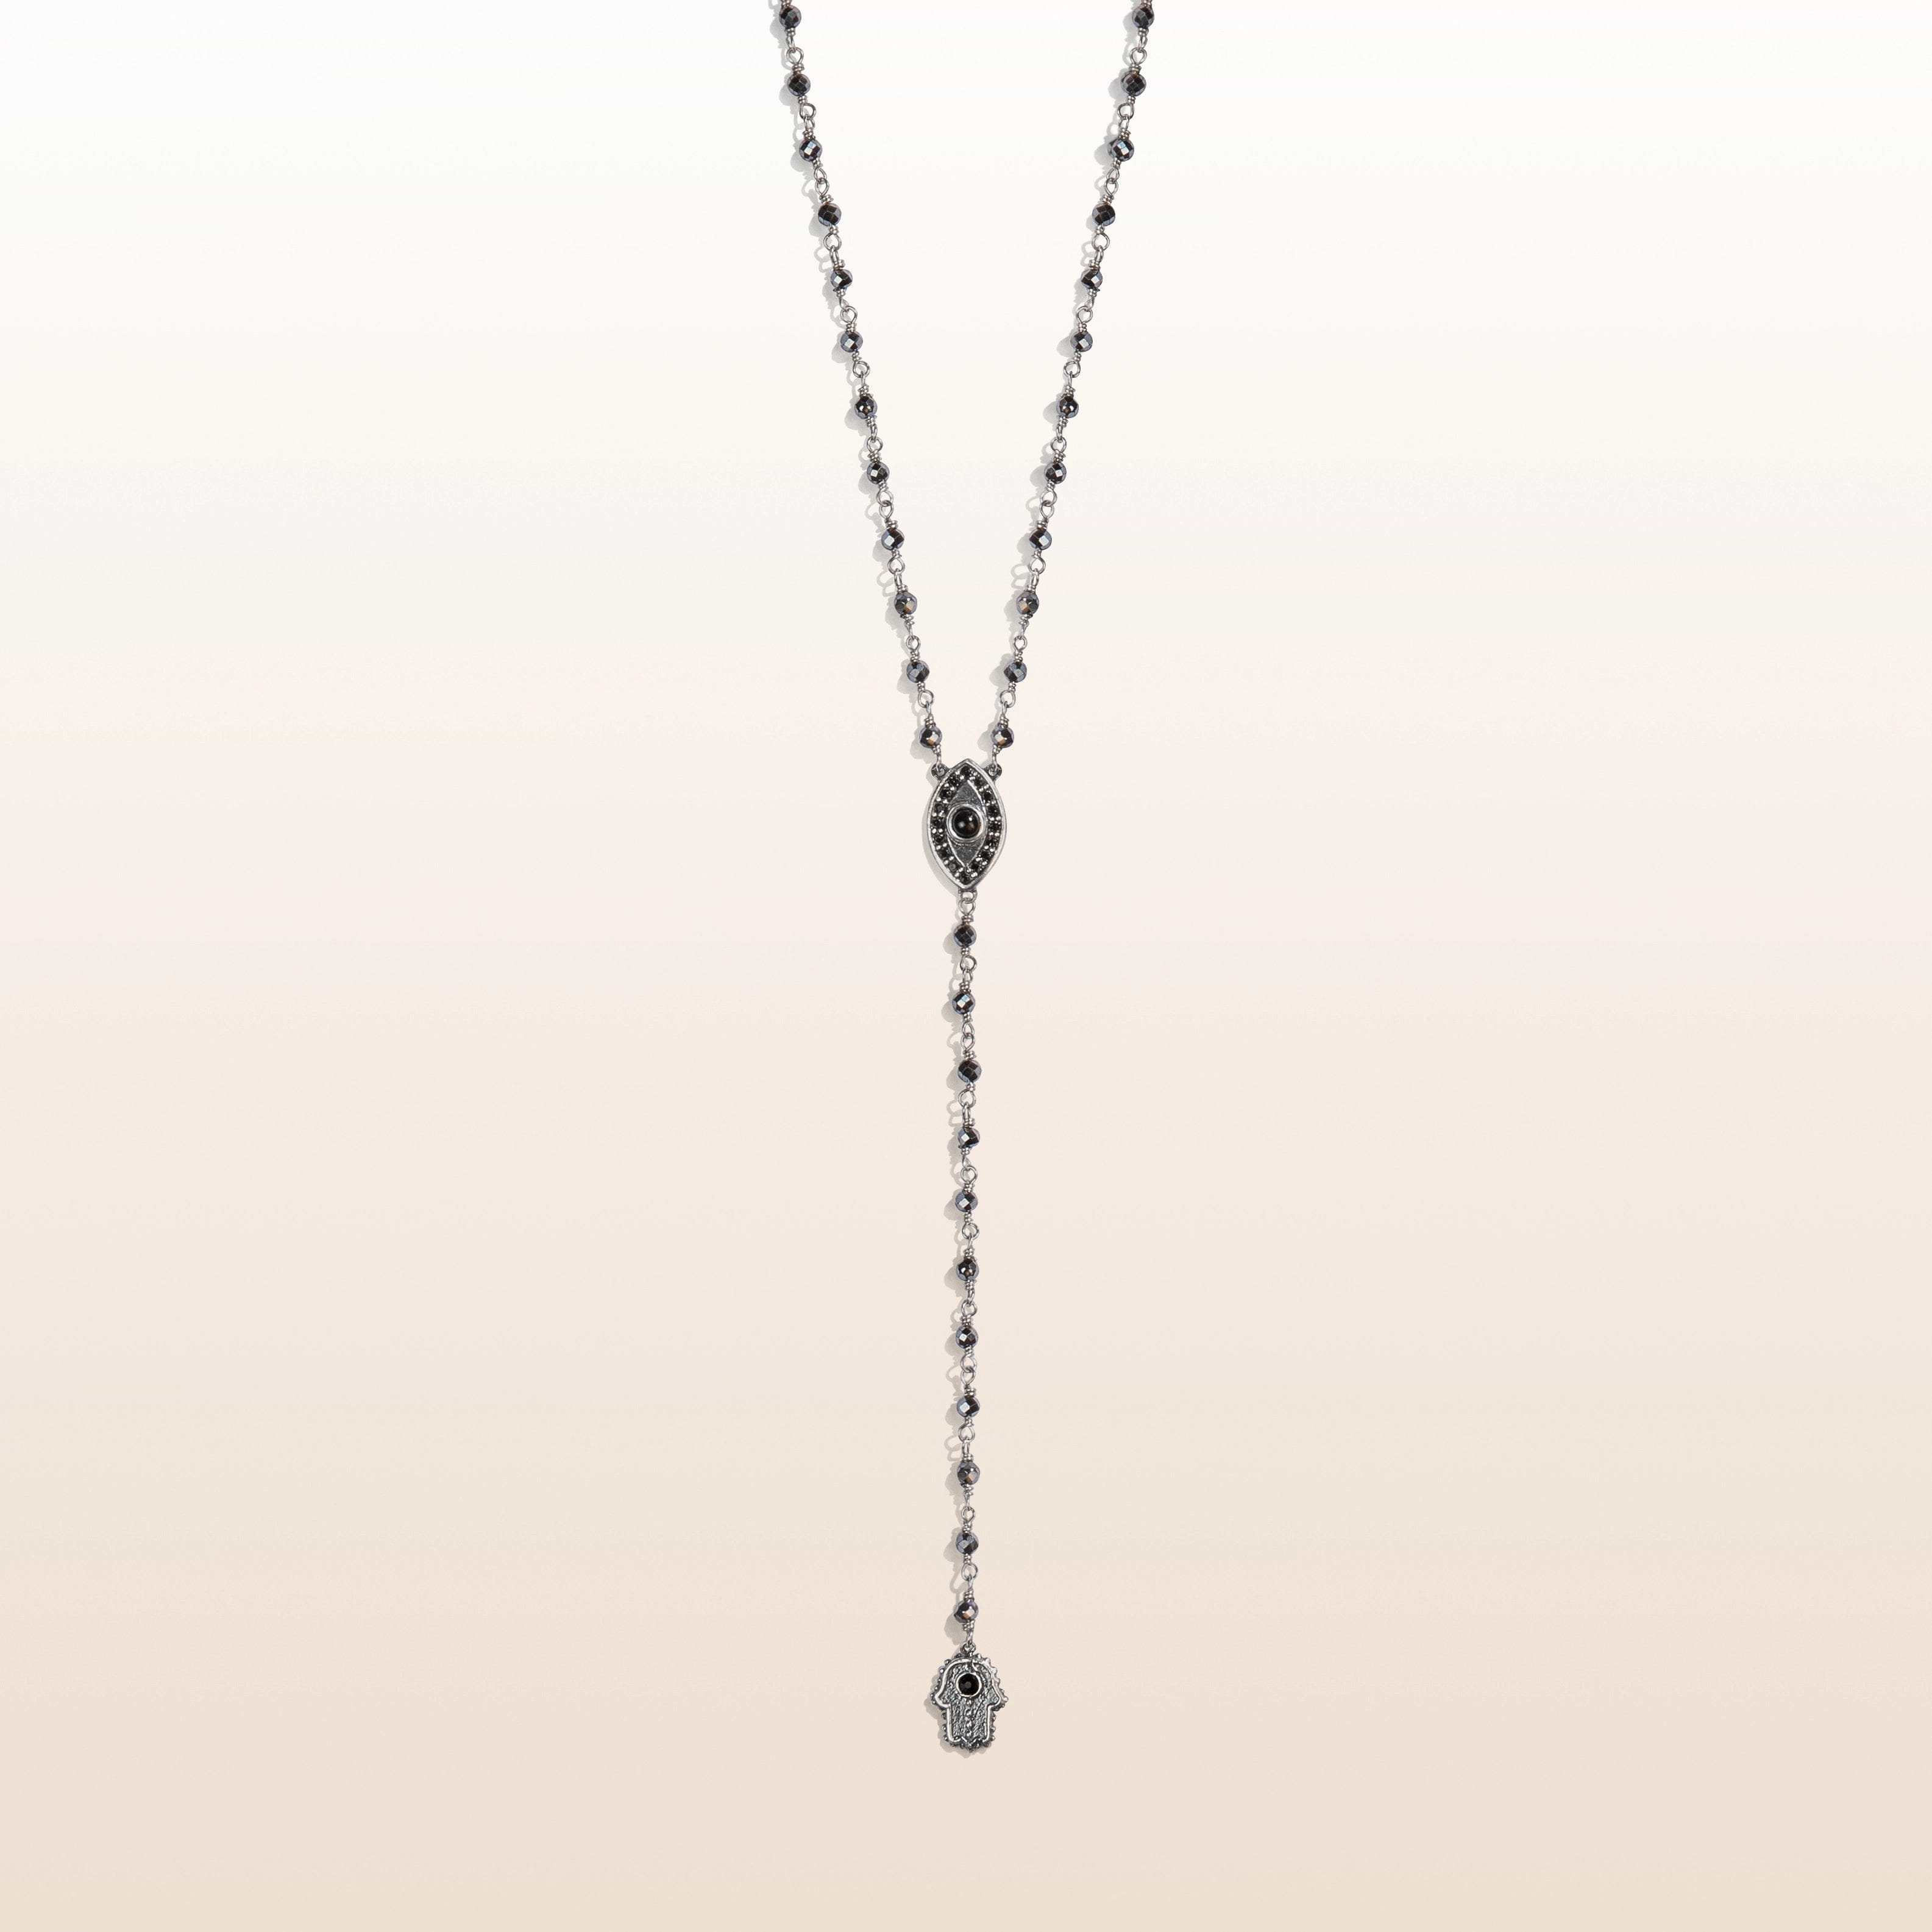 Stand in Strength Rosary Hematite Stone Necklace